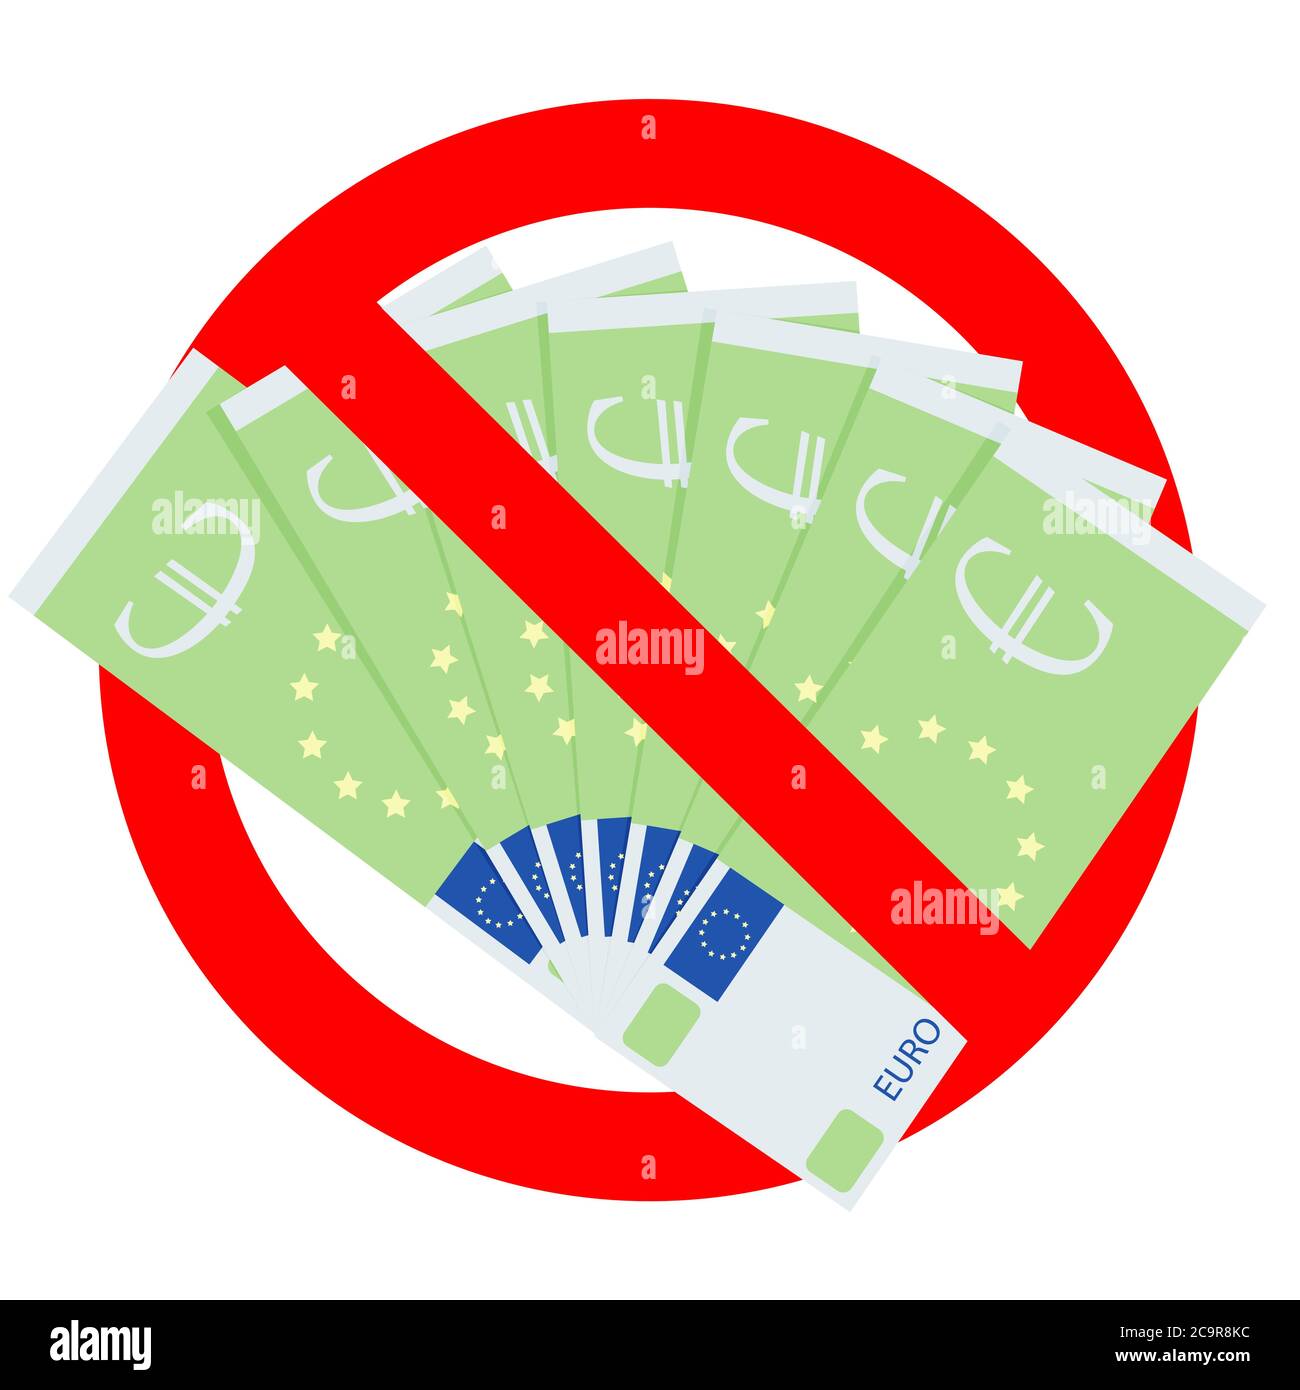 No european tax, ban bribing, no cash euro payment, only credit card pay, banned corruption and bribery, cross banknote, illegal corrupted icon, resis Stock Vector